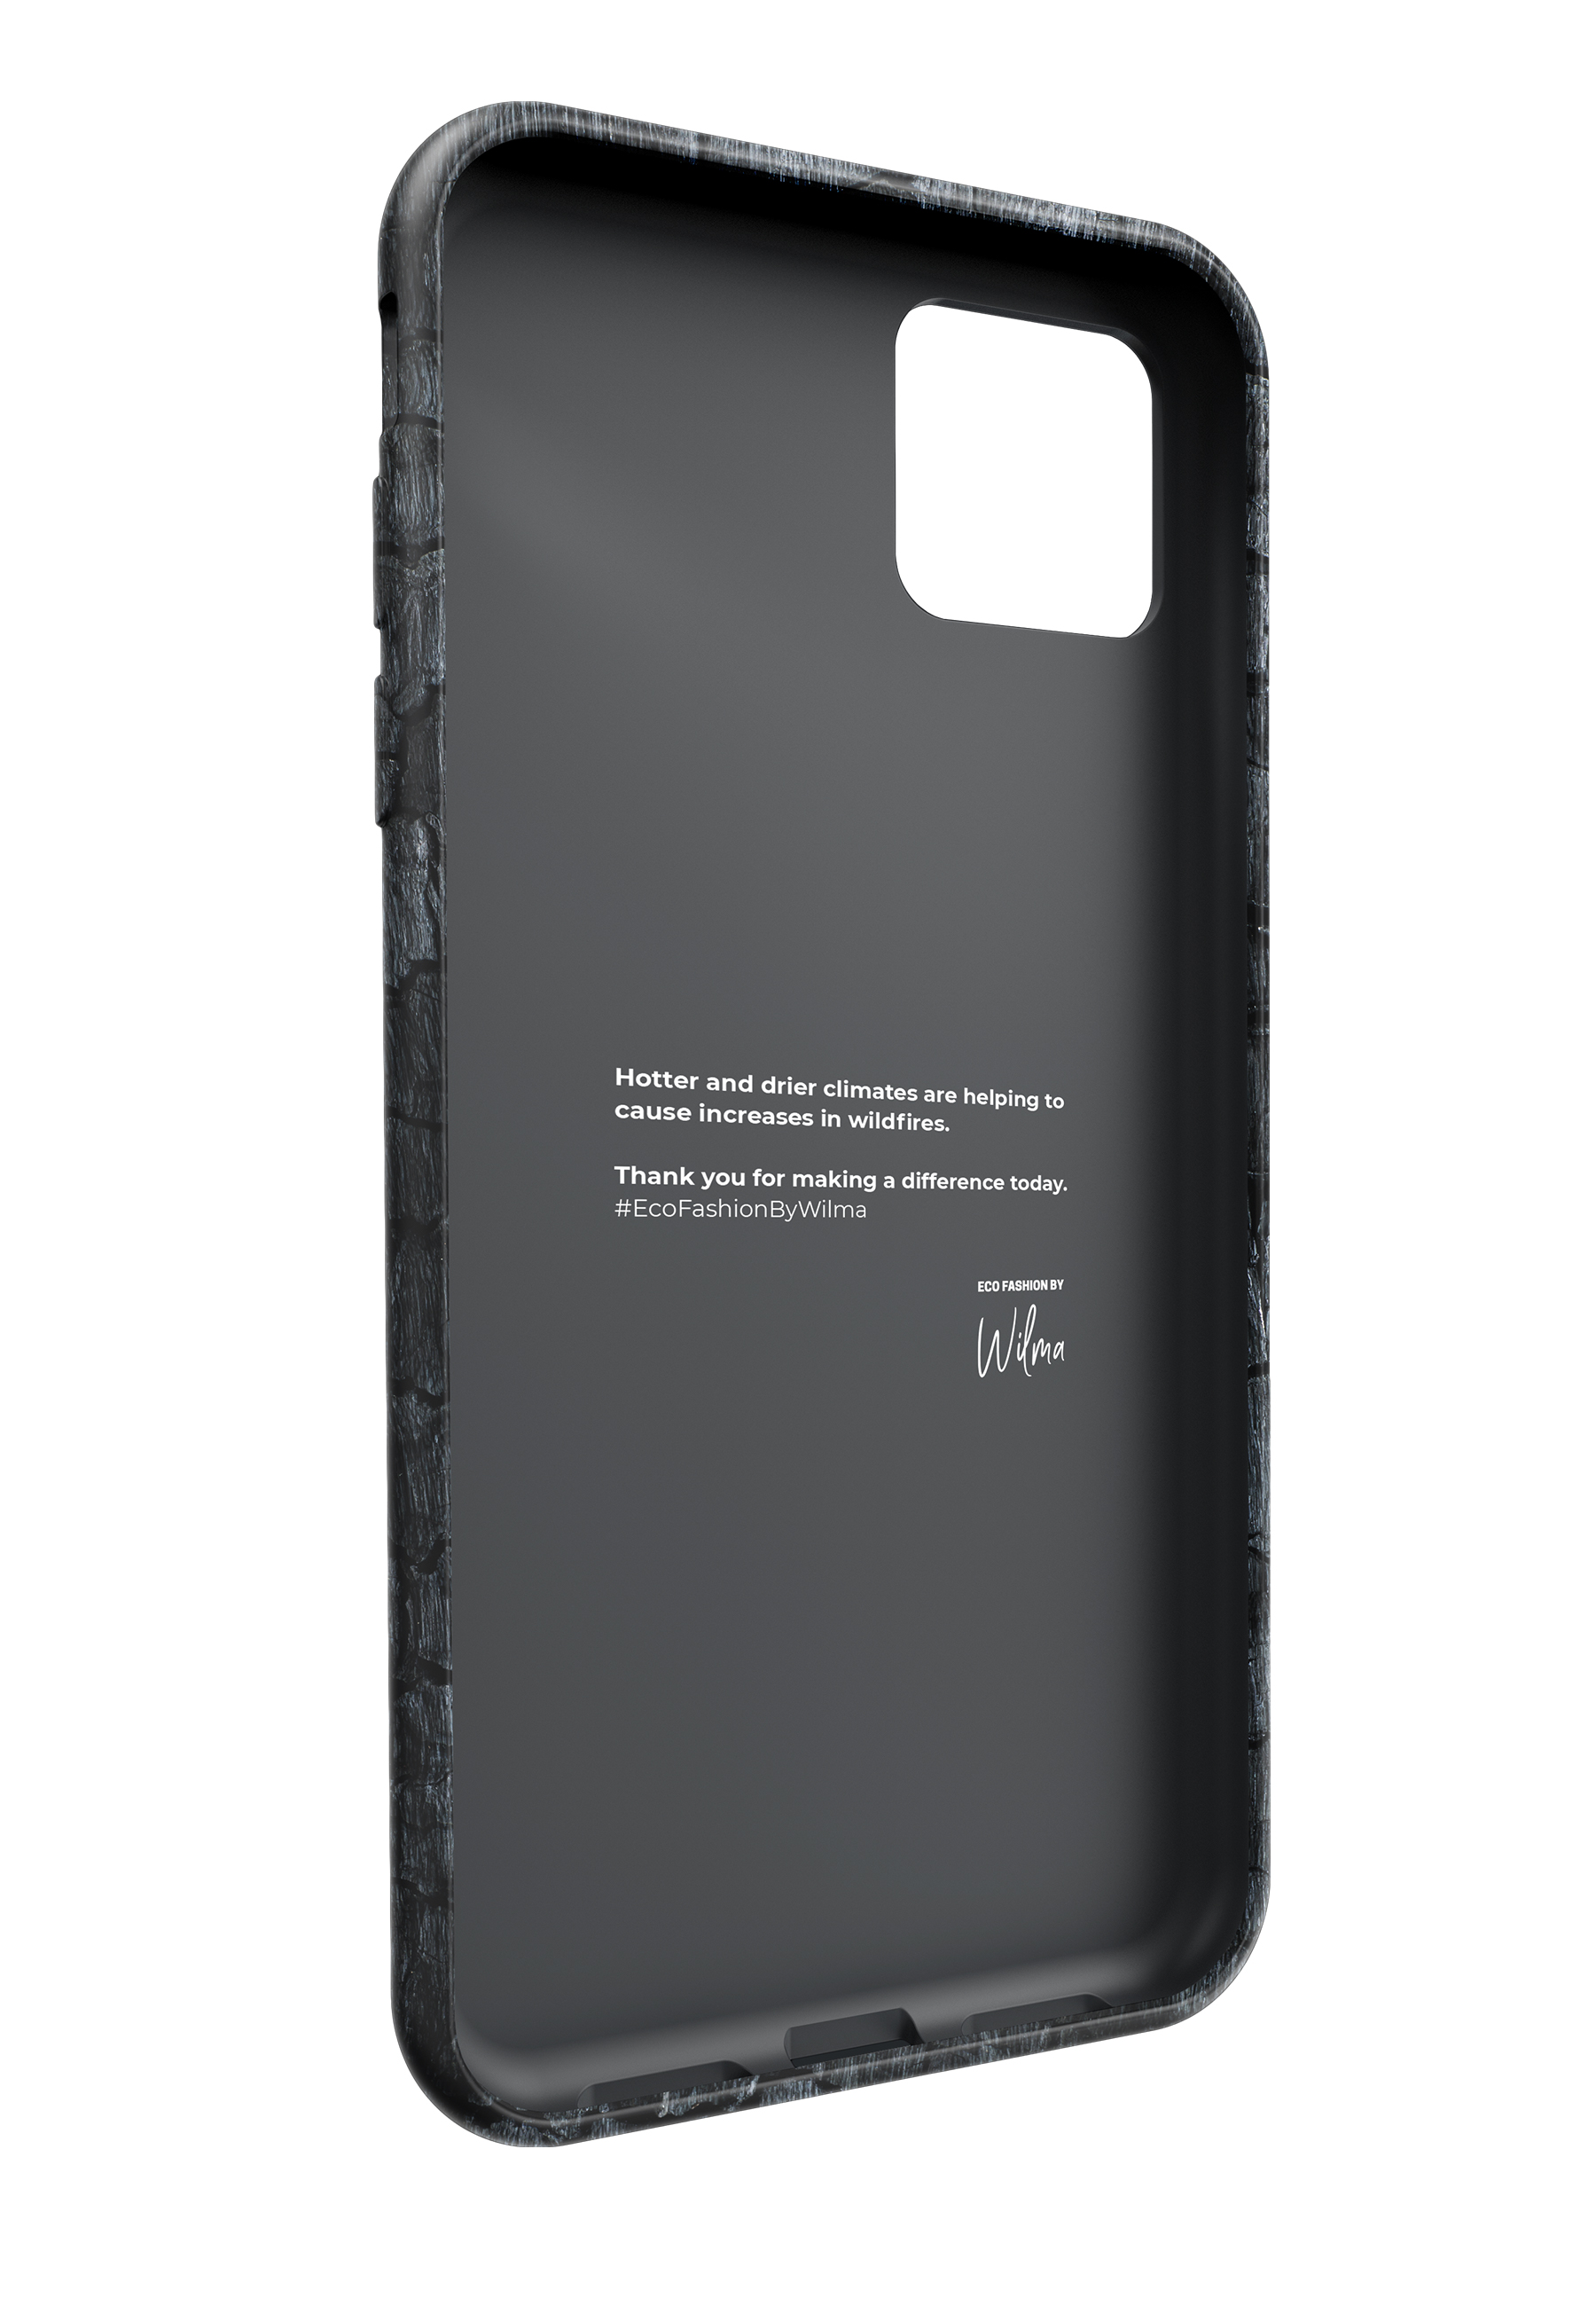 FASHION 12 Apple, BY iPhone WILMA Max, black P12PM, Backcover, Pro ECO